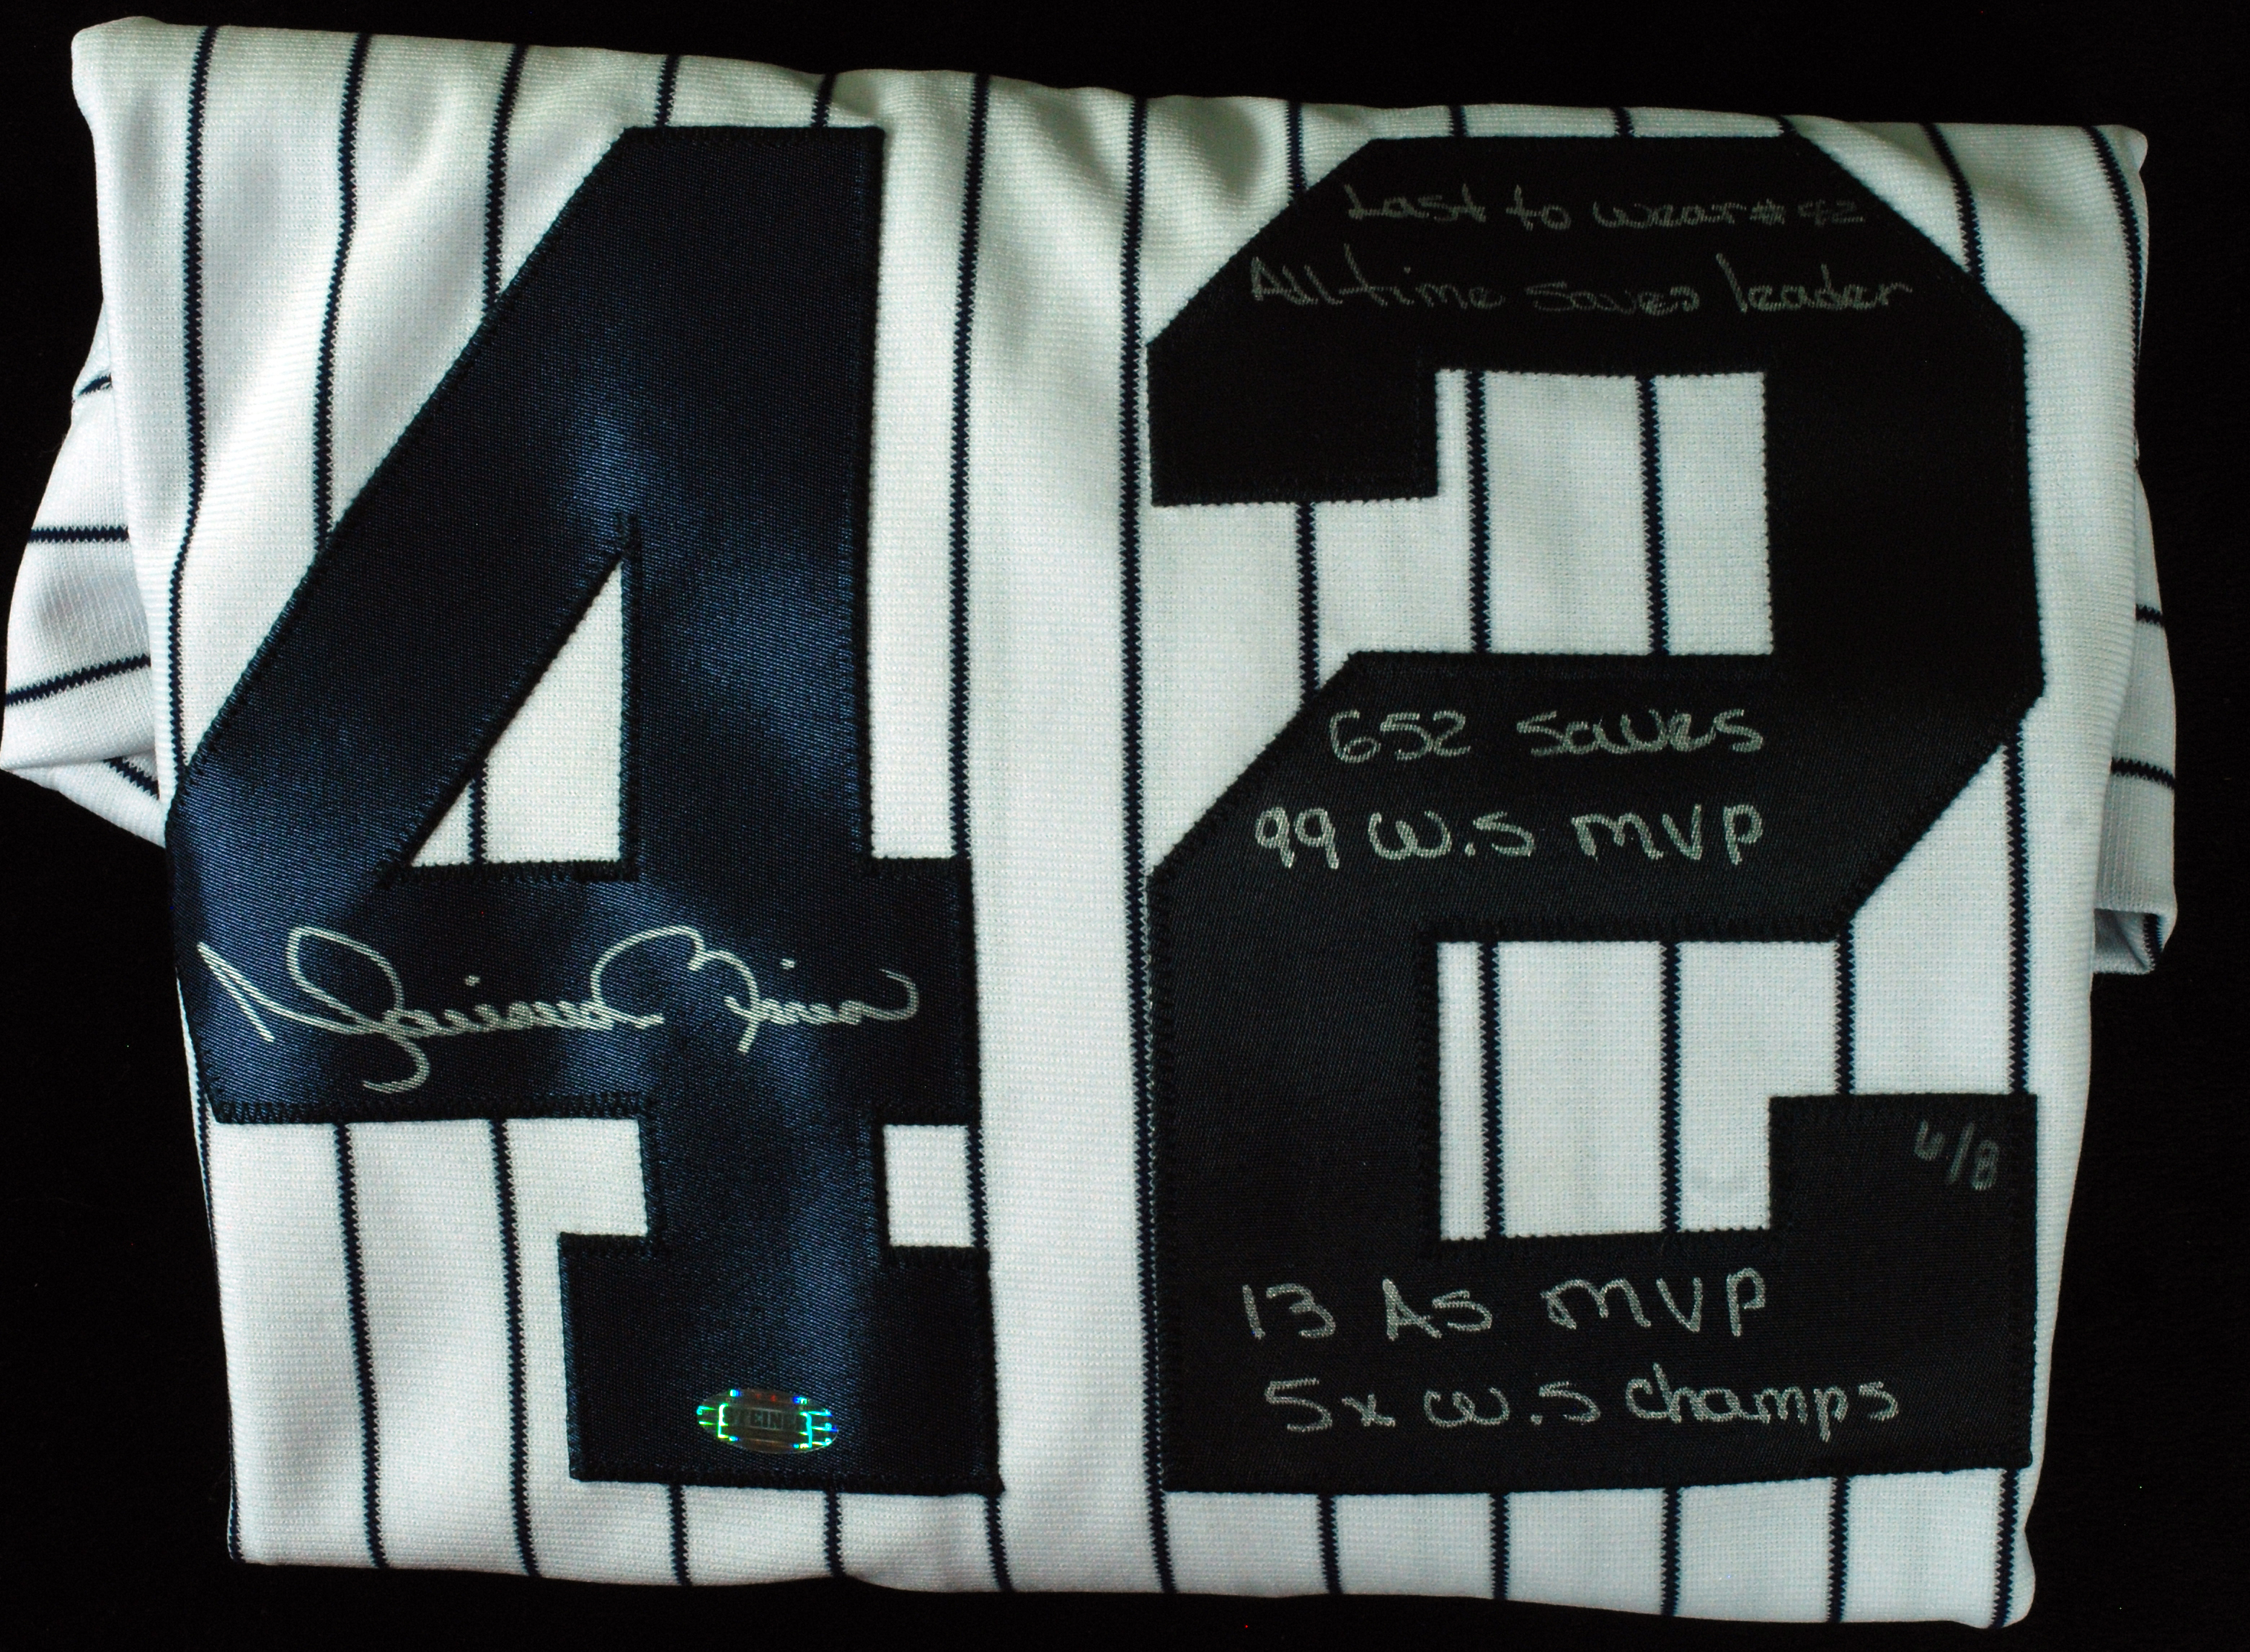 Lot Detail - Mariano Rivera Signed Game Issued Nike Glove (Steiner)